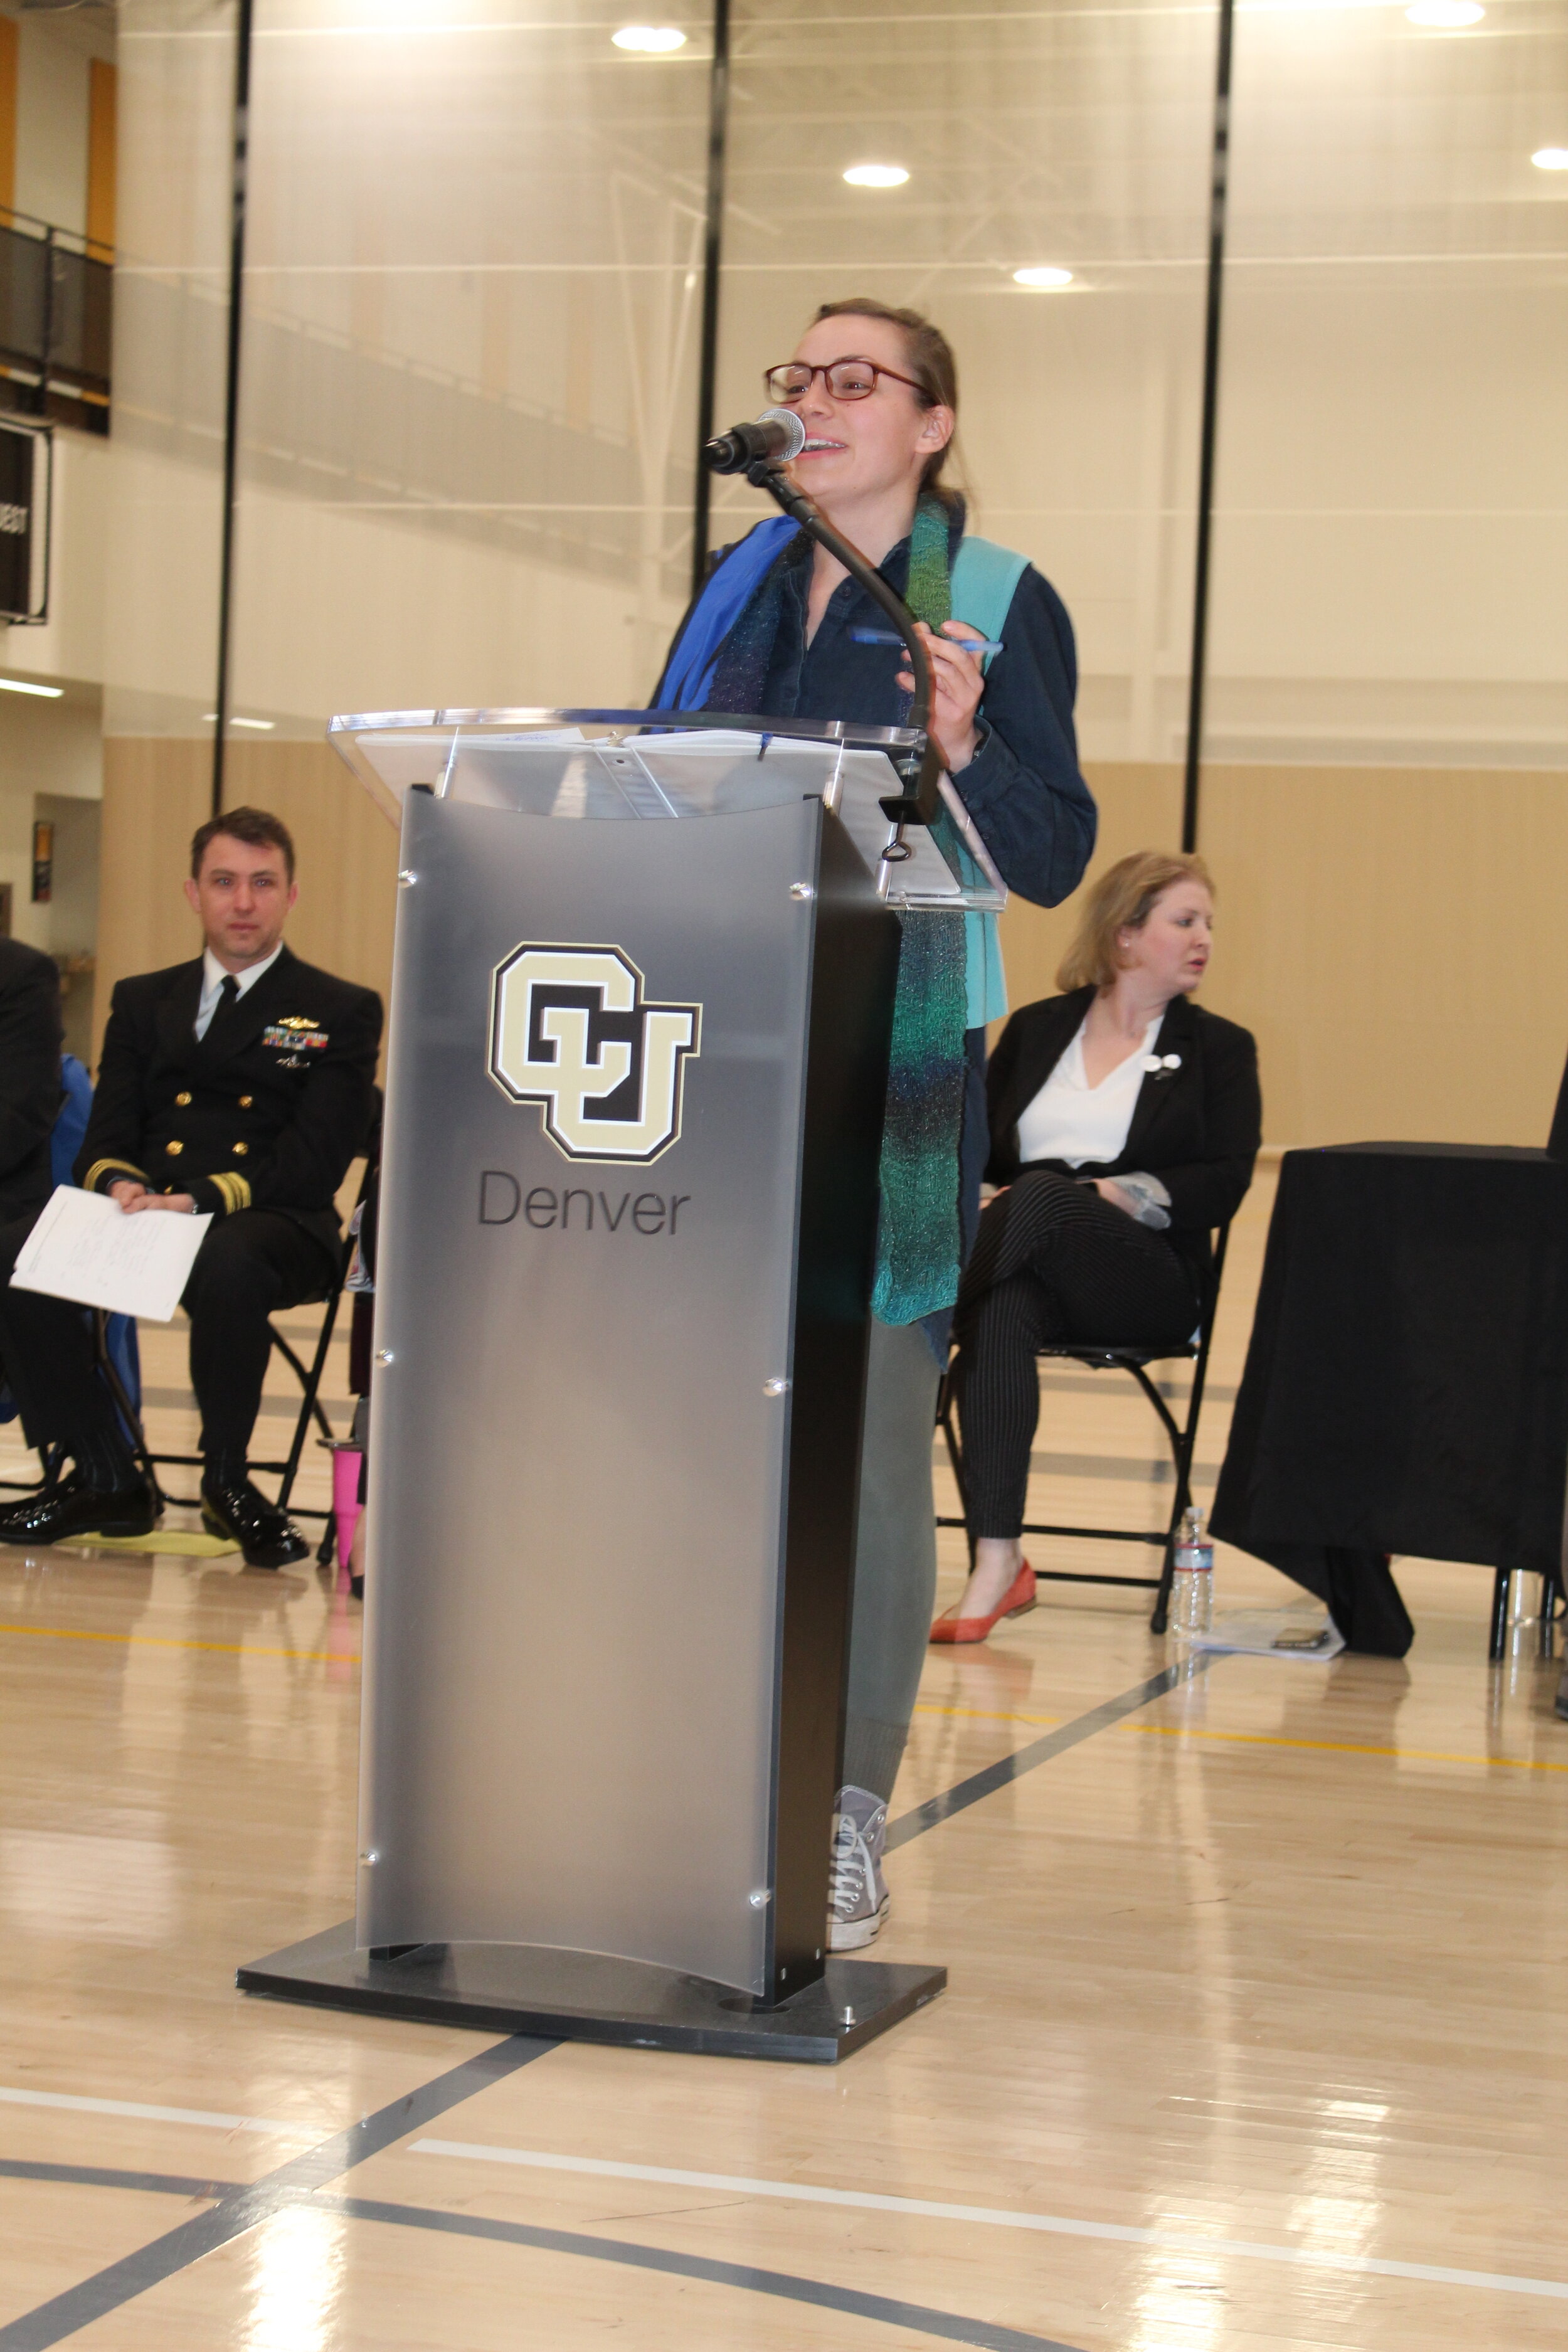  Mallory Hiss, with Cherry Creek Stewardship Partners, presented the awards at the 2020 Science Fair ceremony. 